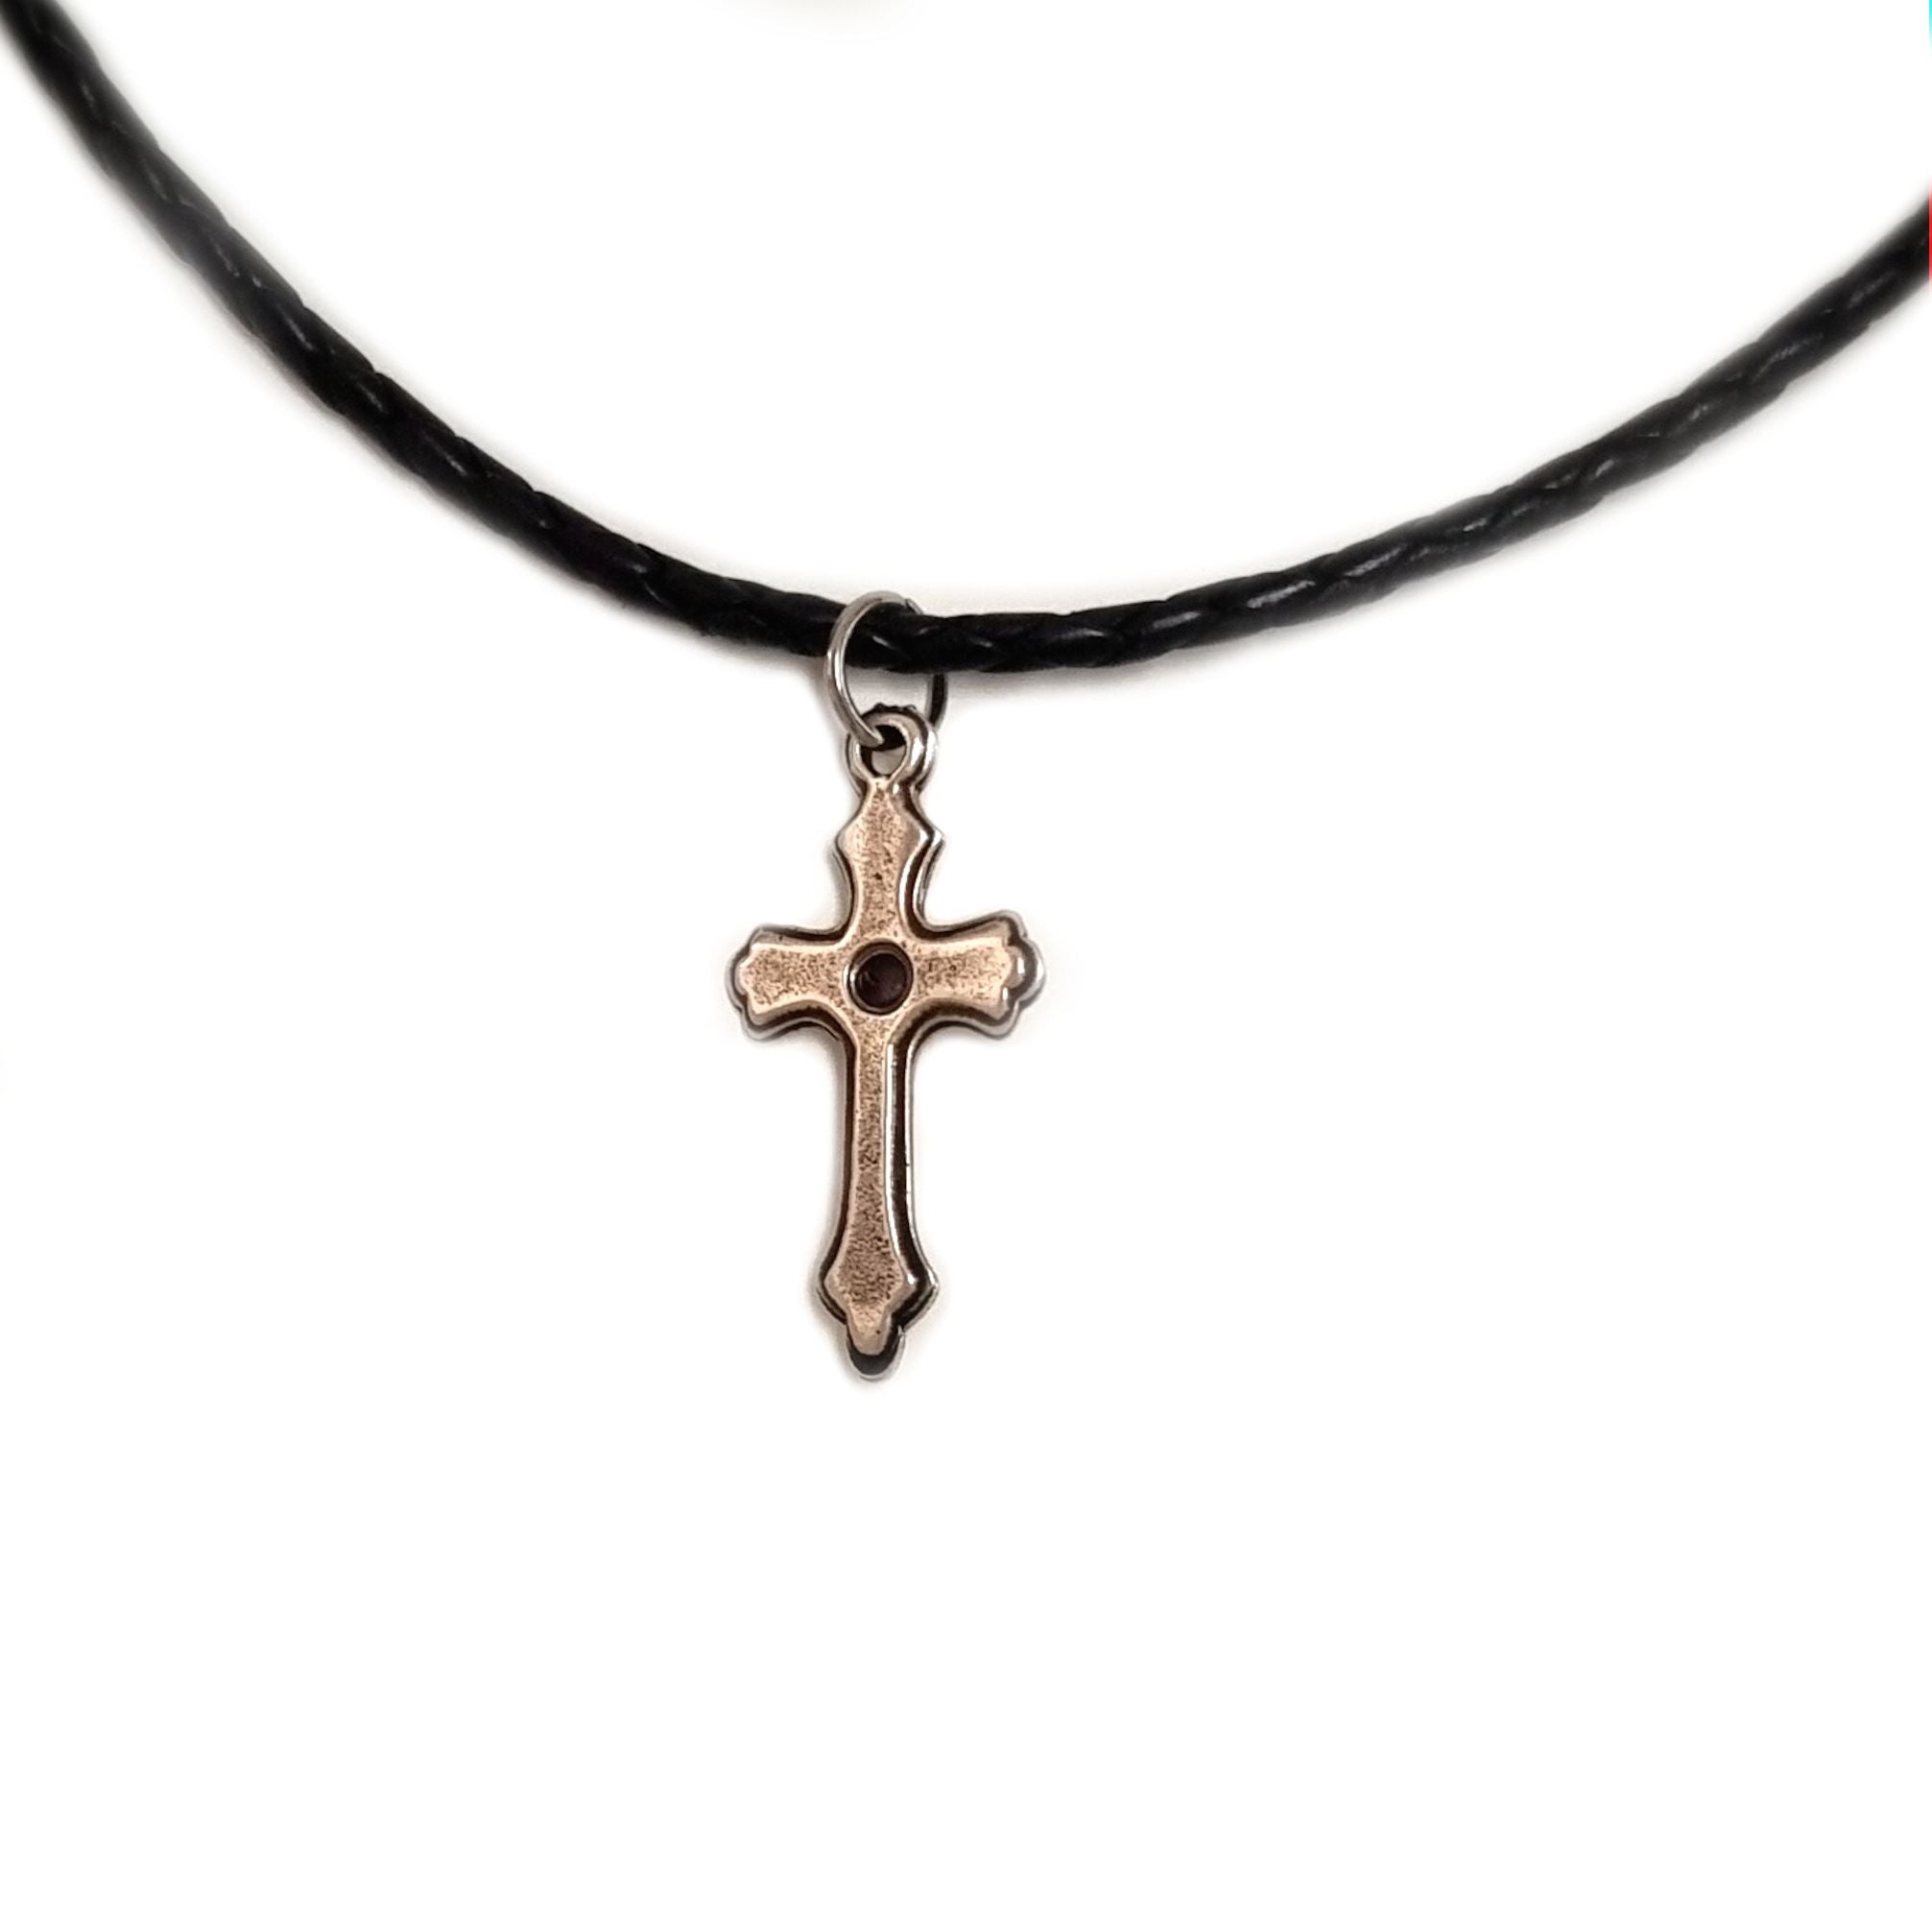 Mens cross necklace,stainless steel,beaded,wood inlay,7 sizes,leather,surfer  | eBay